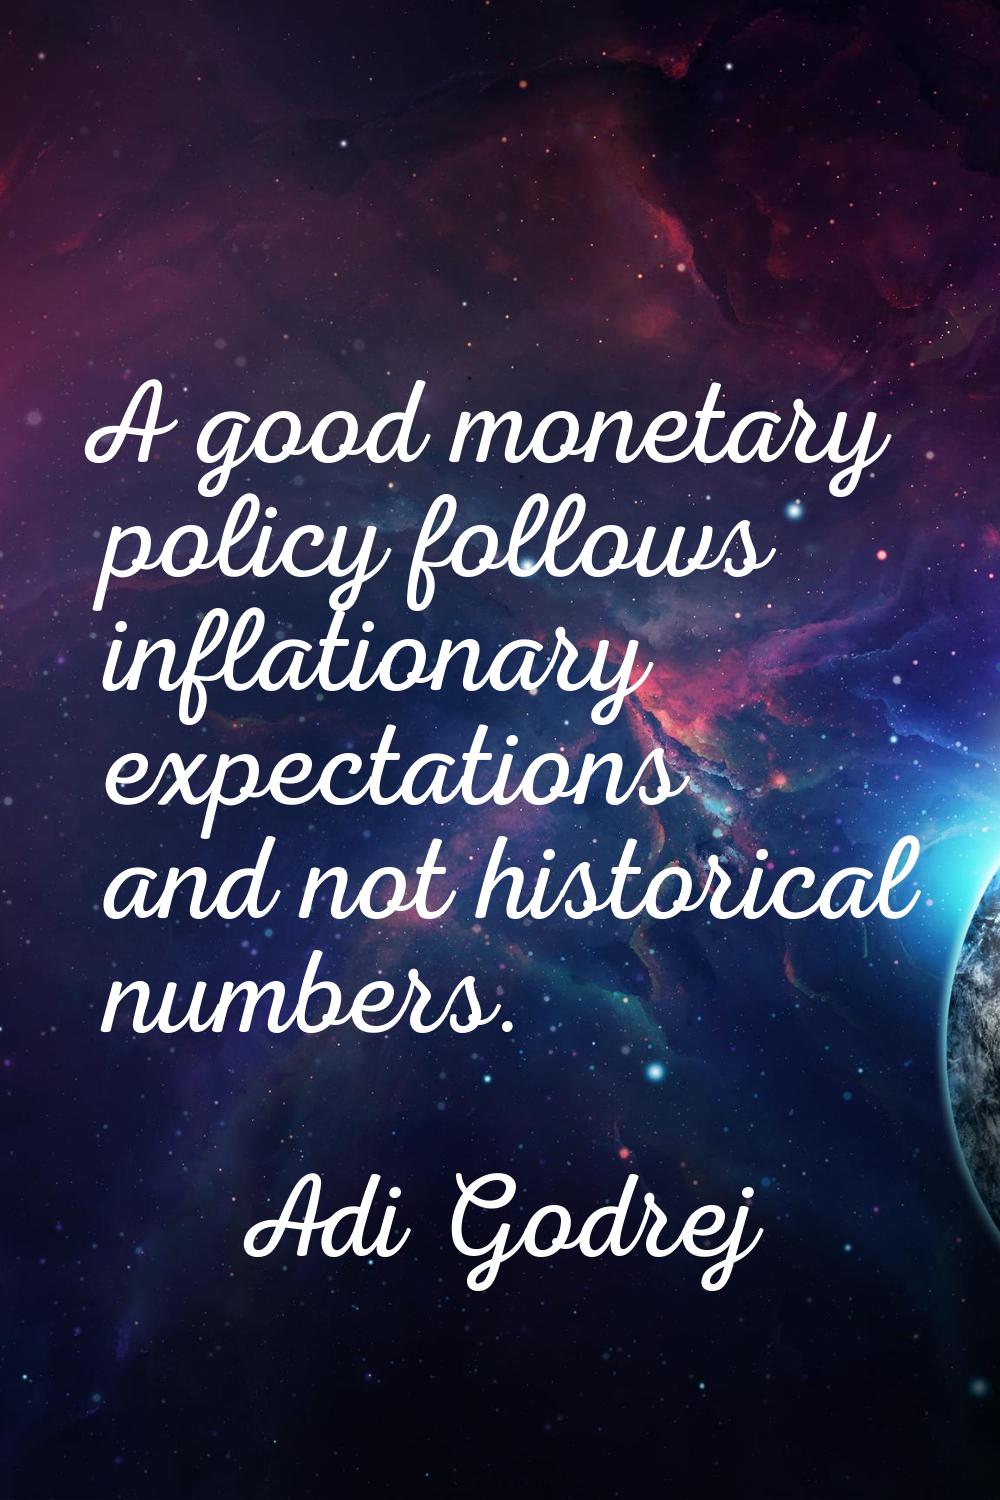 A good monetary policy follows inflationary expectations and not historical numbers.